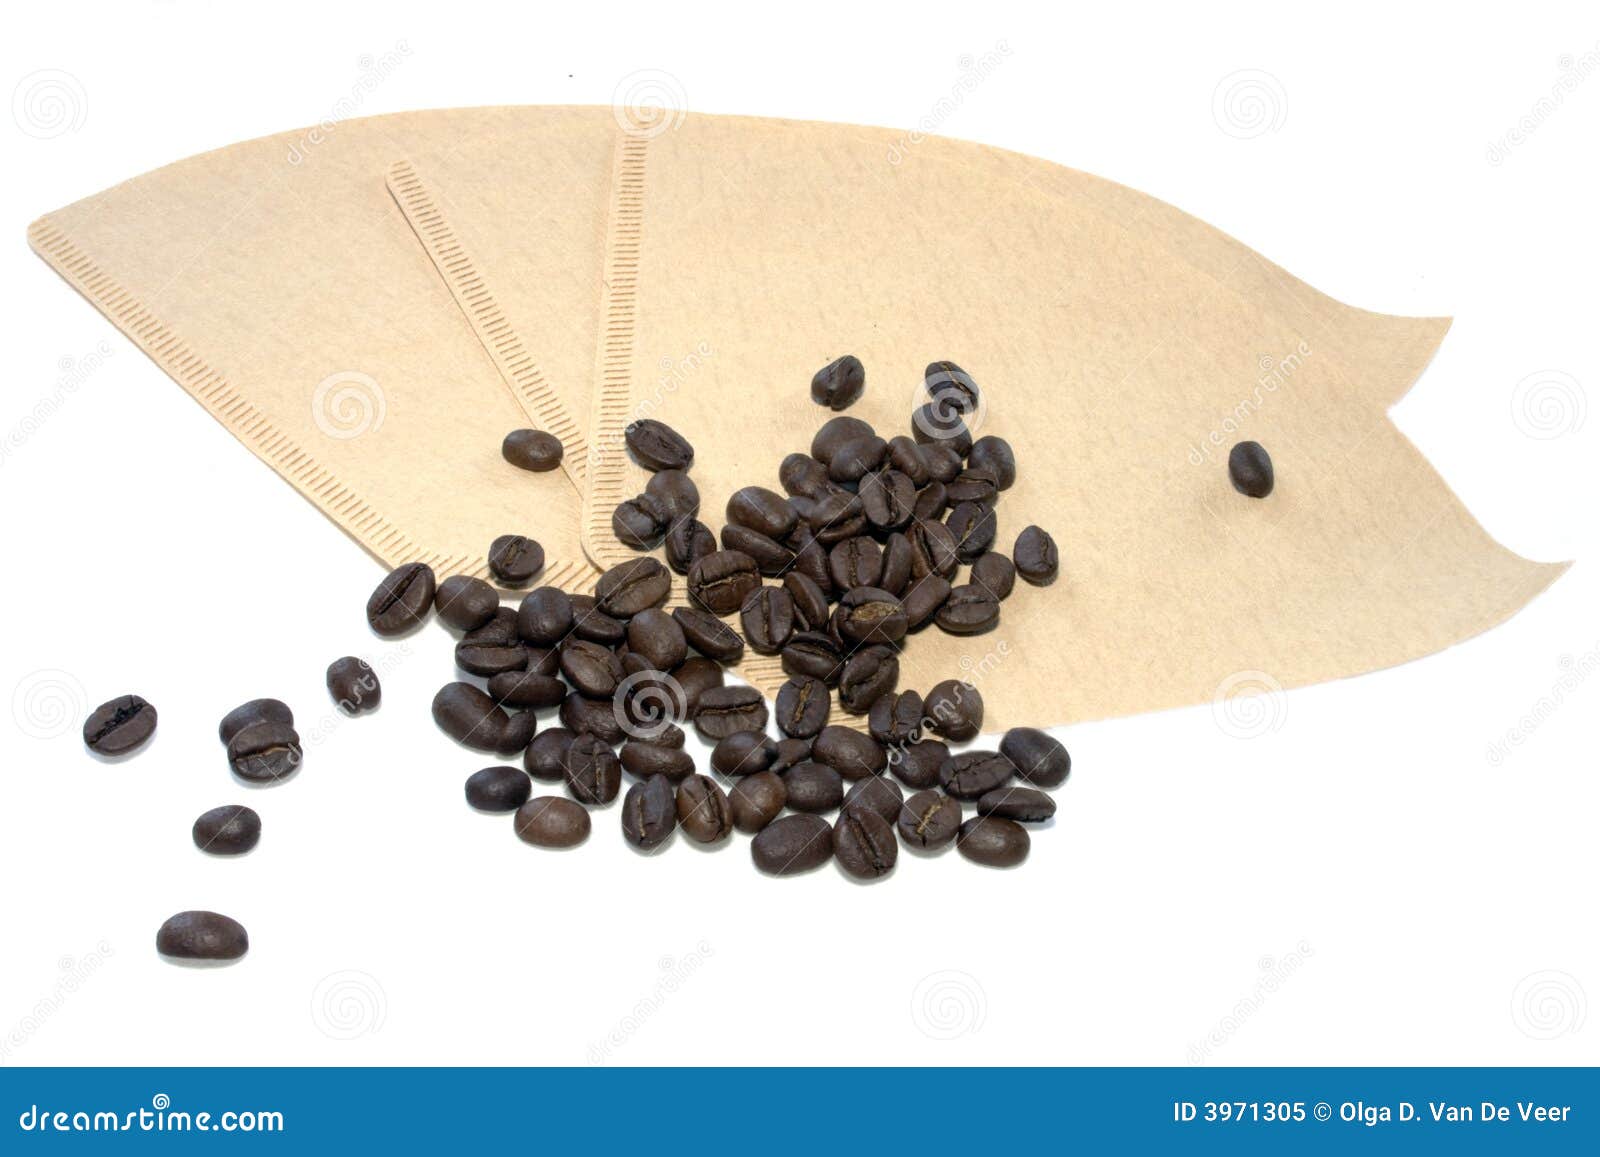 coffee filters and beans